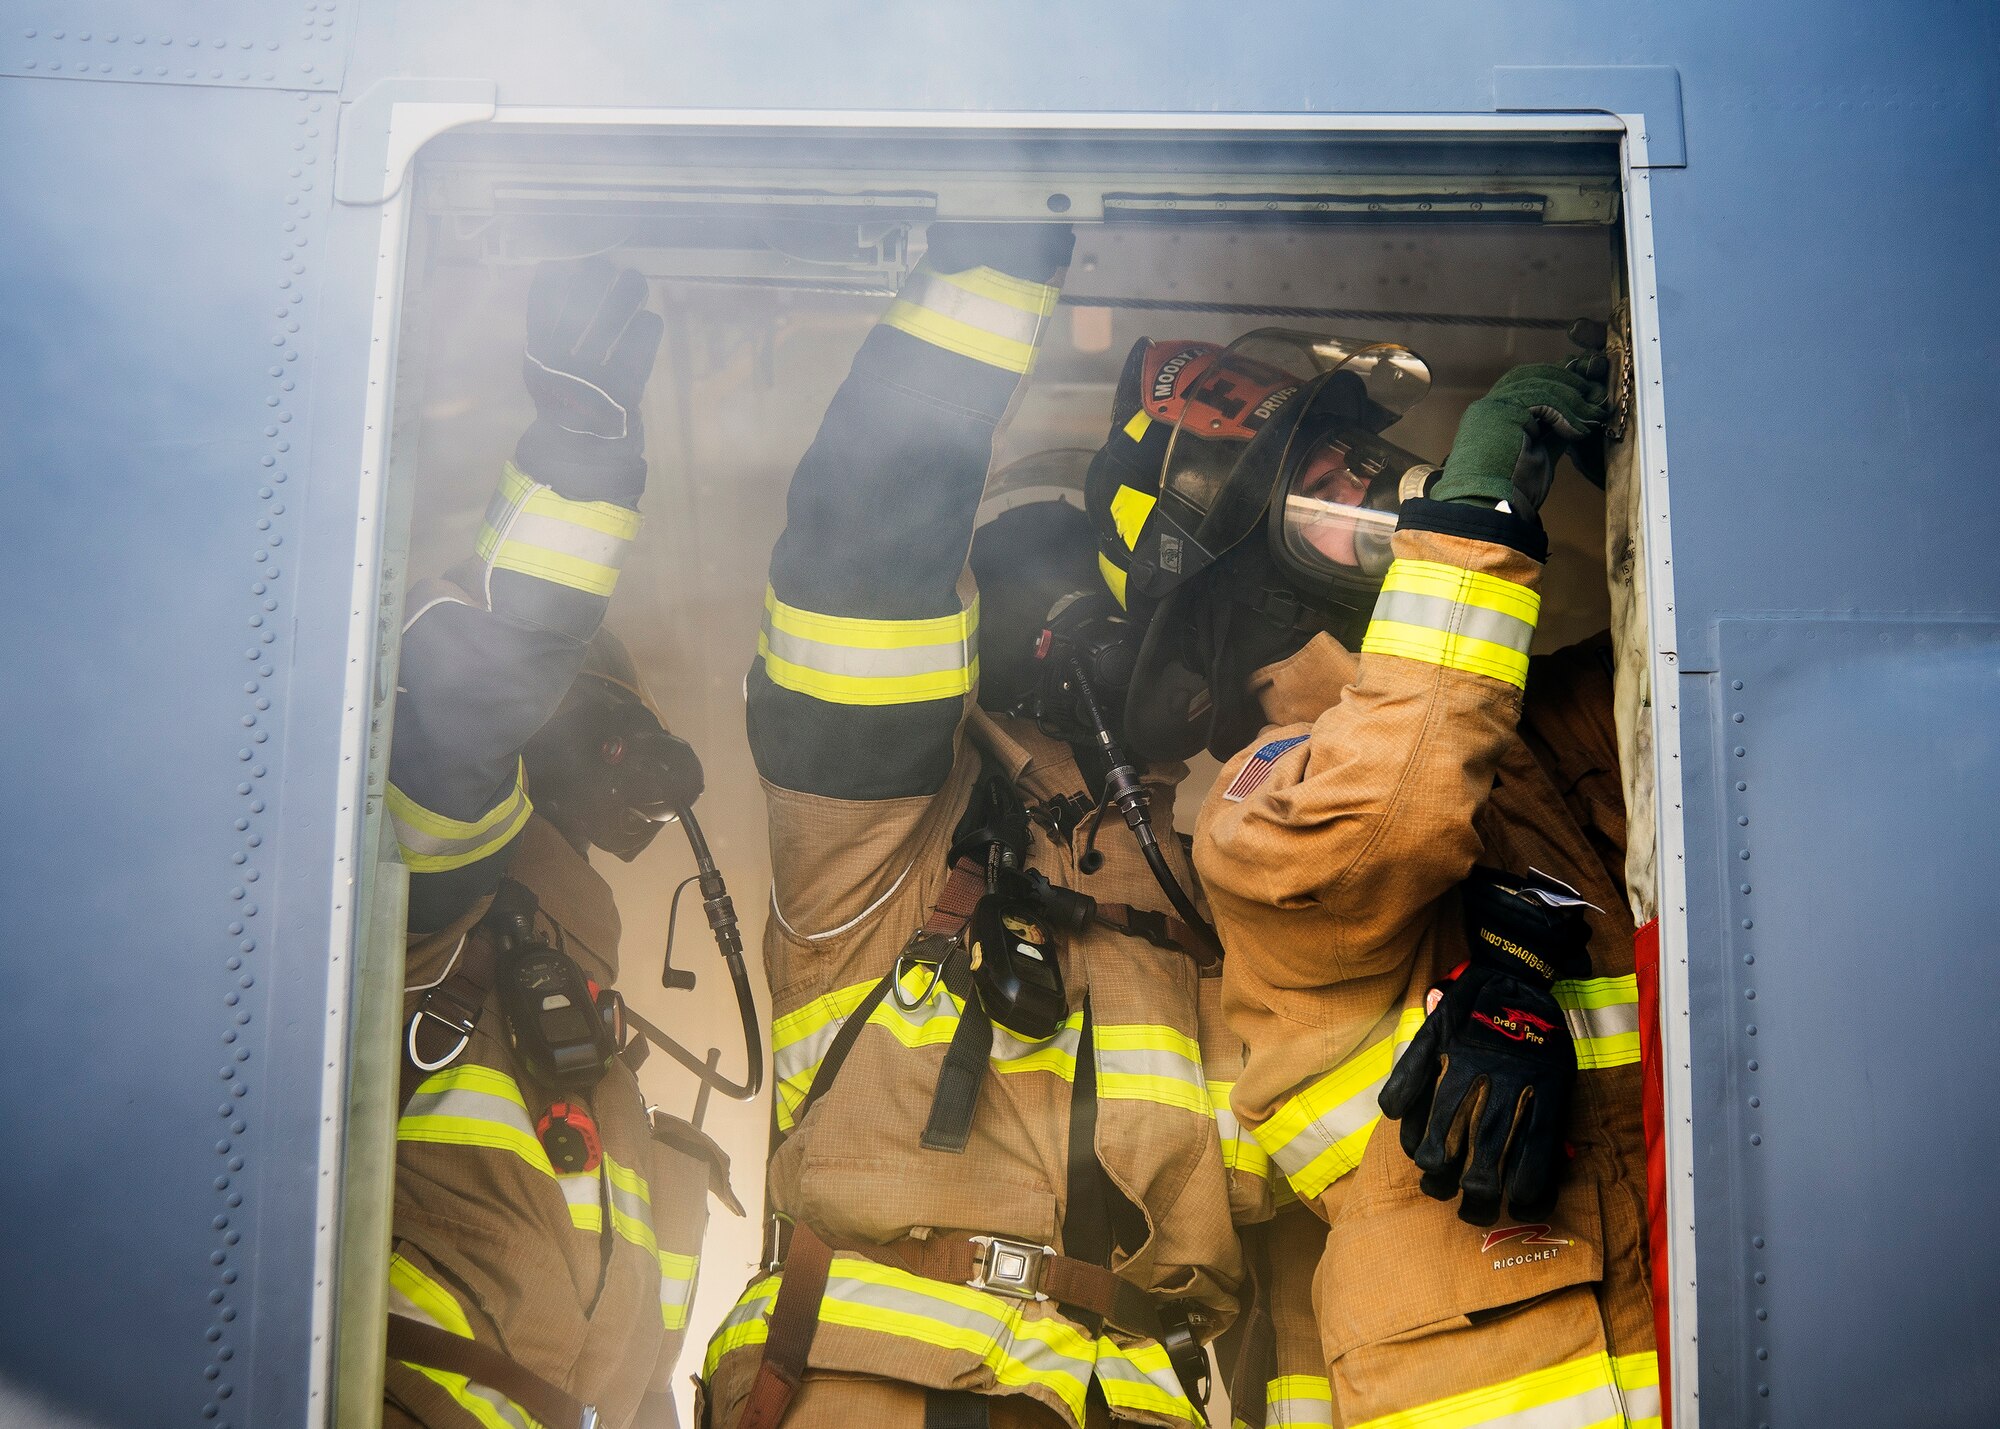 Firefighters from the 23d Civil Engineer Squadron (CES), secures a door on the side of an HC-130J Combat King II during egress training, July 11, 2019, at Moody Air Force Base, Ga. Firefighters conducted the training to evaluate their overall knowledge and proficiency of how to properly shut down and rescue personnel from a C-130 during an emergency situation. The training required the firefighters to properly enter and ventilate the aircraft while conducting swift rescue techniques to safely locate and remove passengers from the aircraft. (U.S. Air Force photo by Airman 1st Class Eugene Oliver)